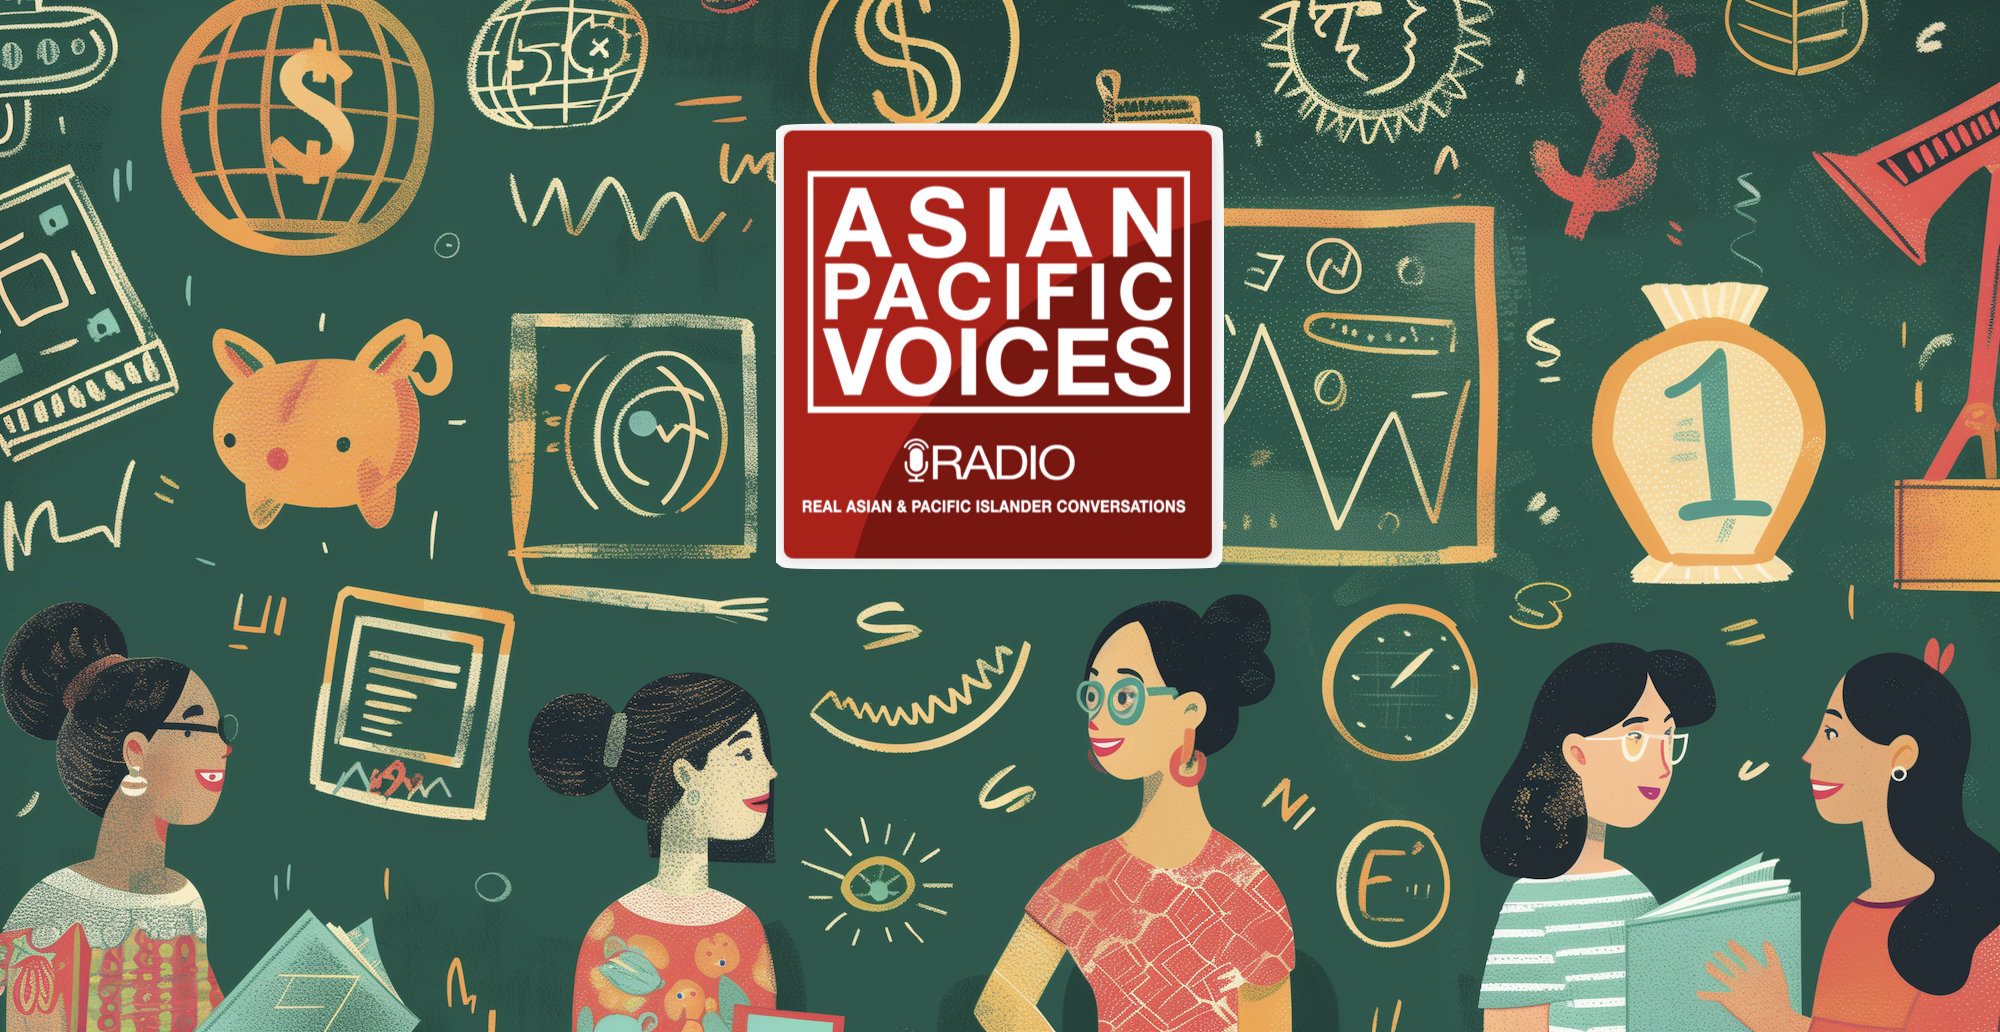 Kim Scouller bei Asian Pacific Voices Radio